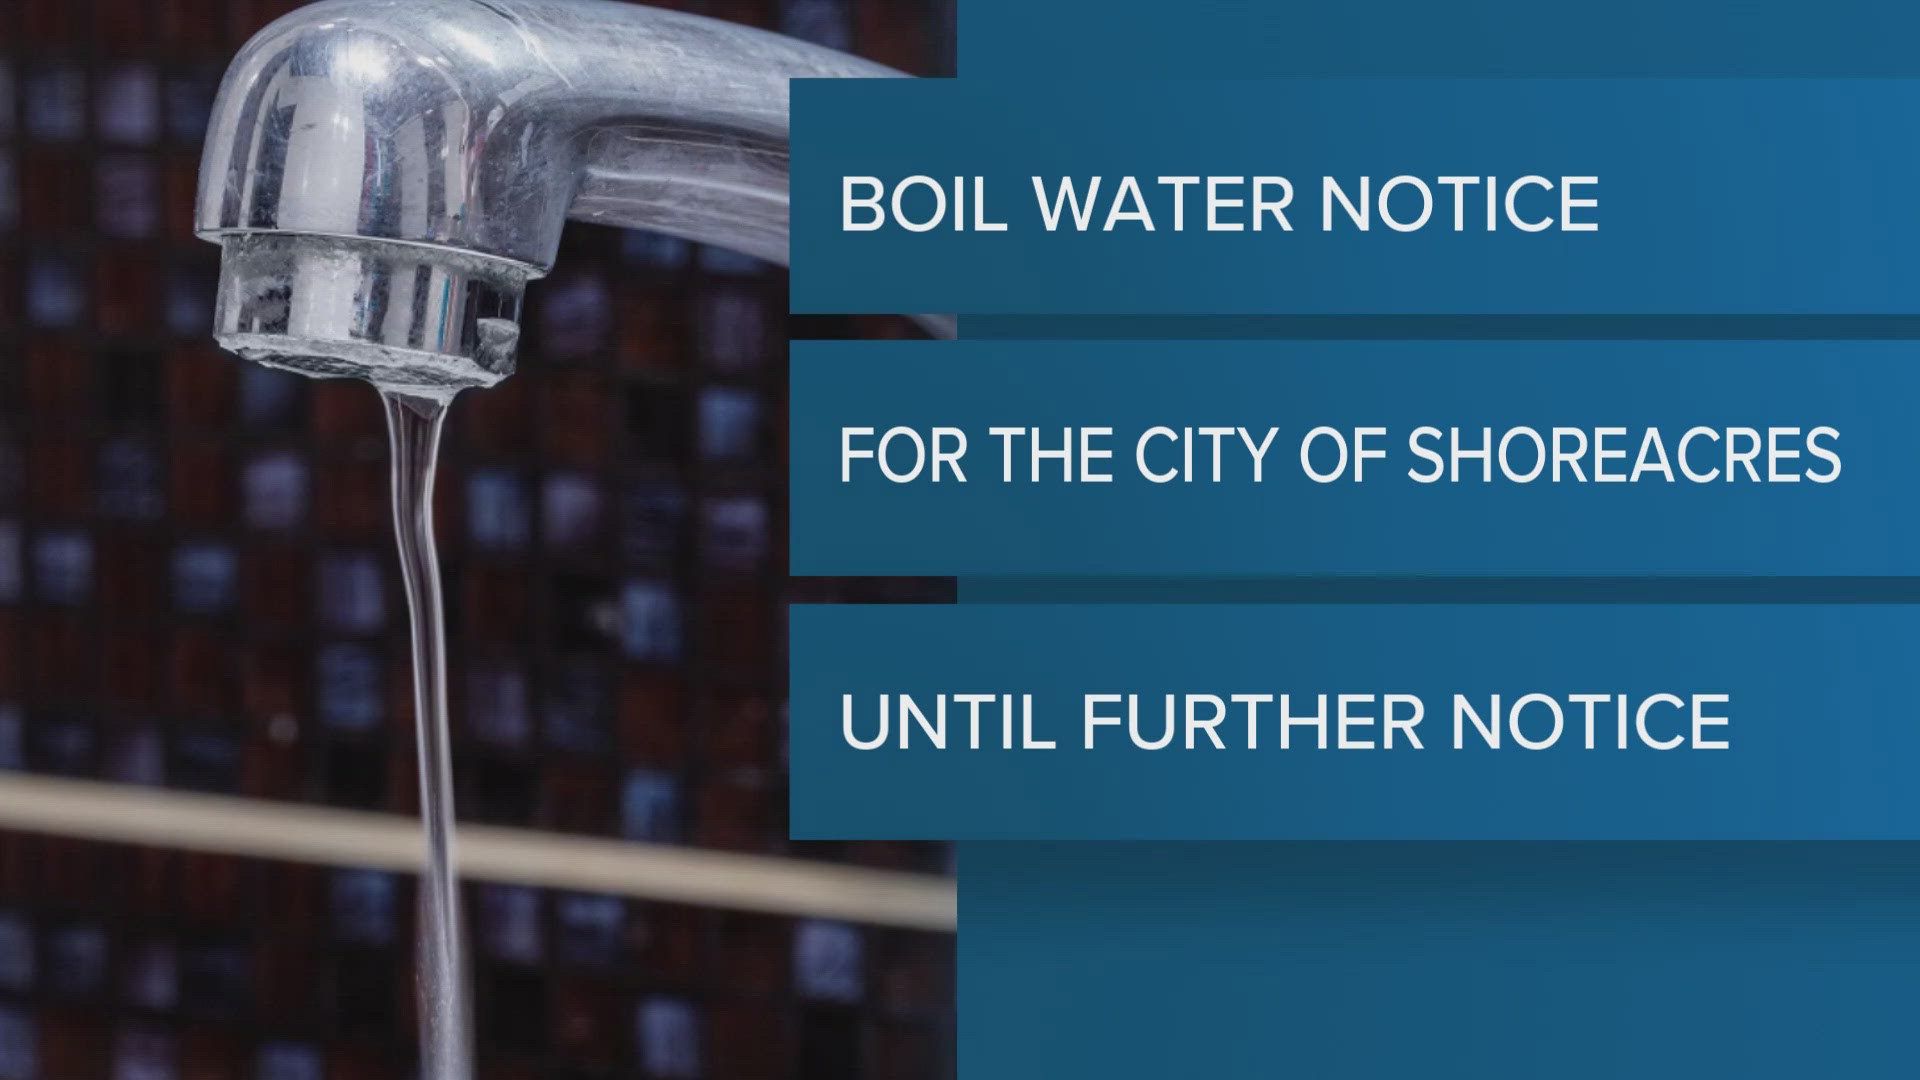 A boil water notice was issued Monday for the City of Shoreacres due to low distribution pressure, according to Harris County officials.